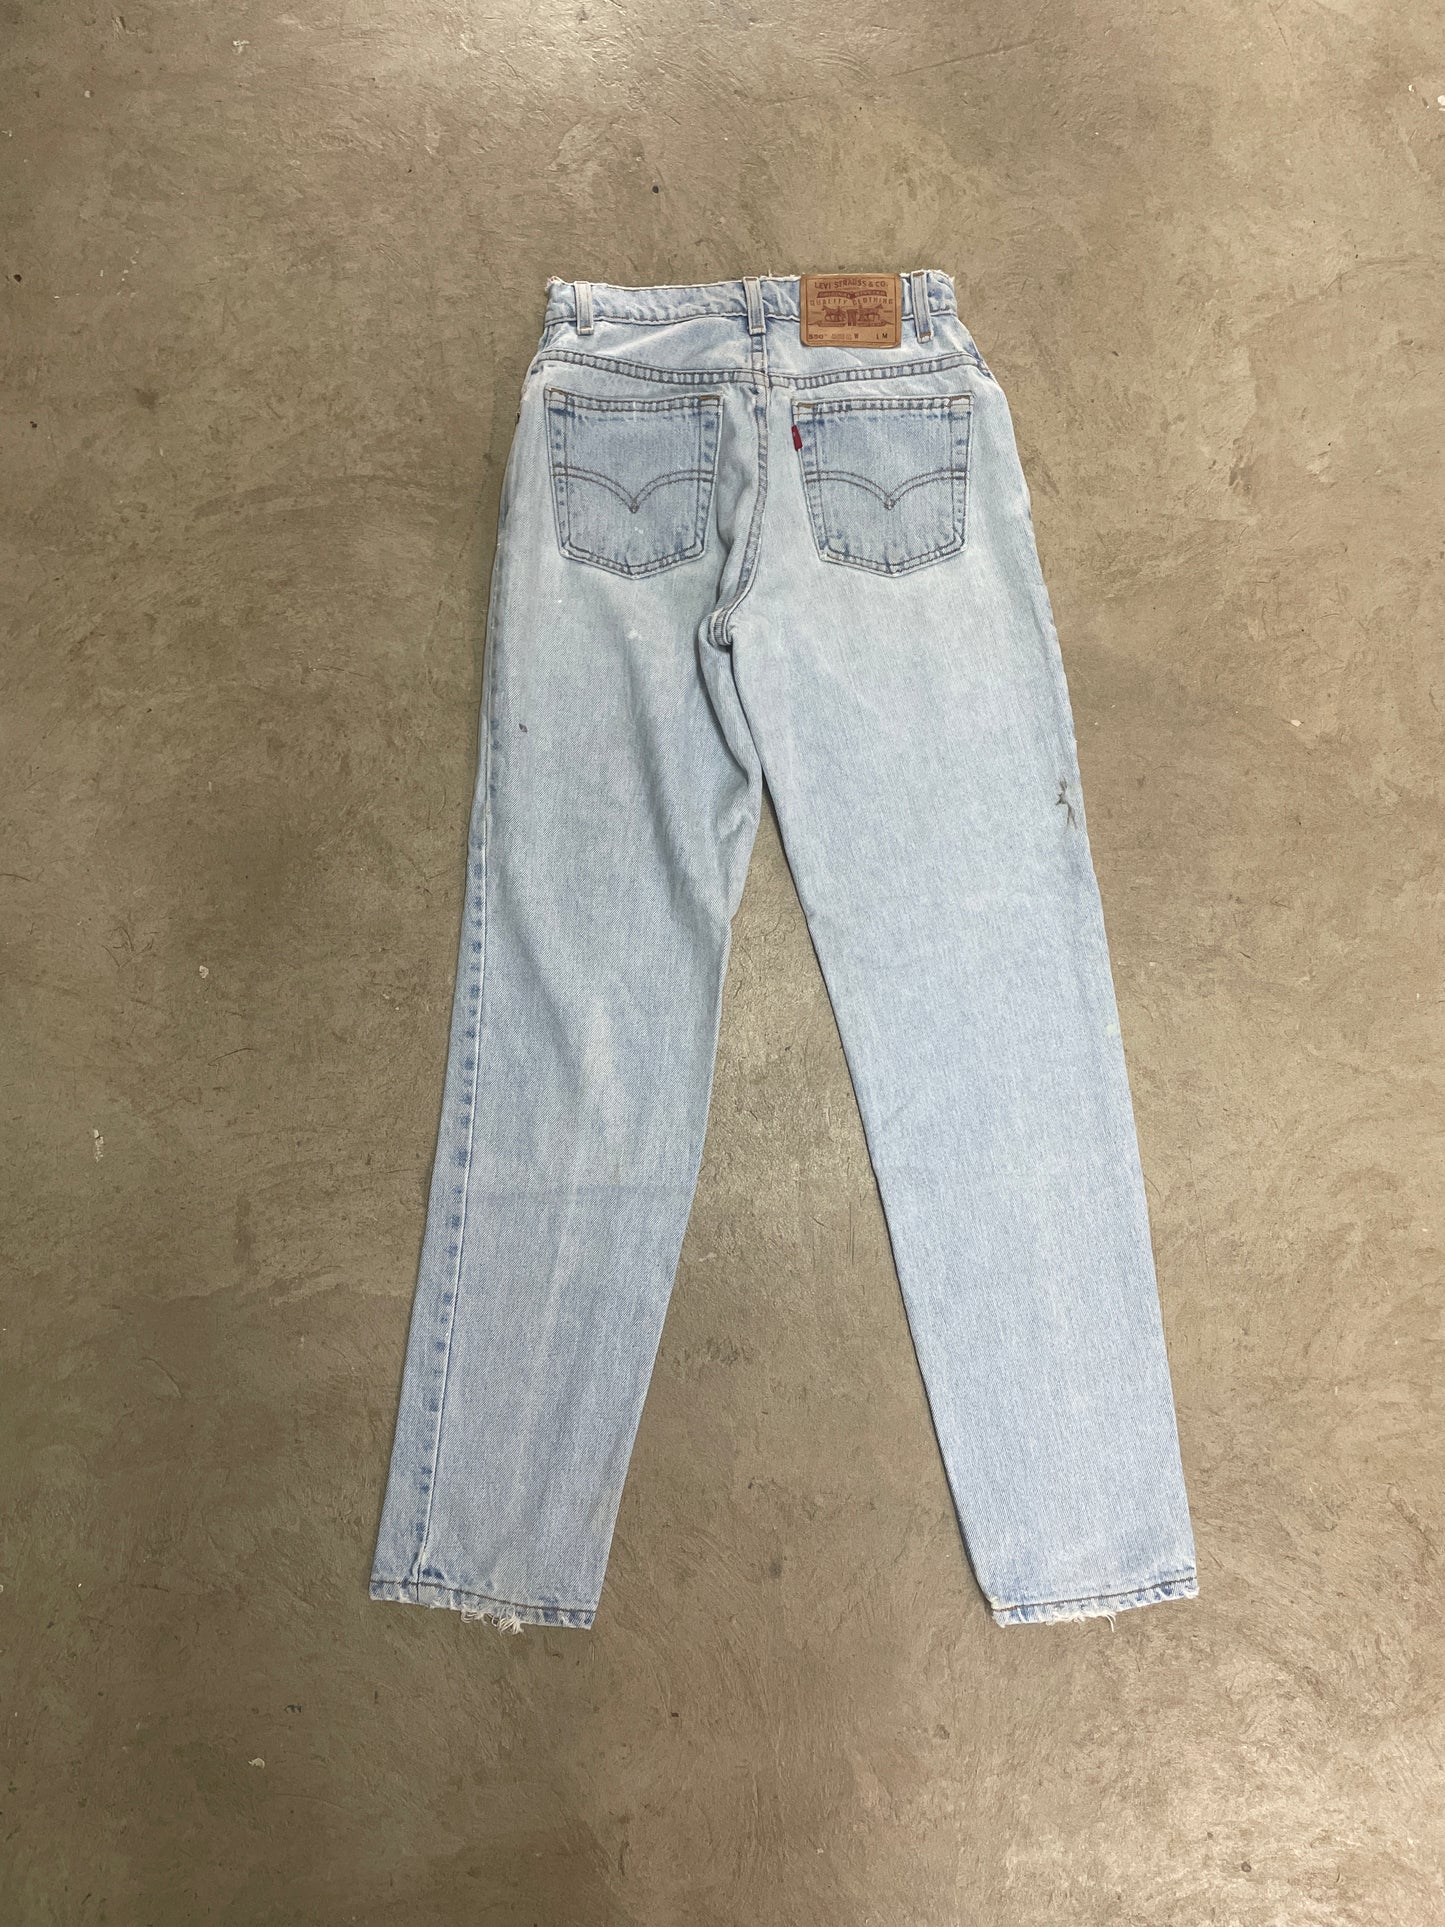 Women’s Vintage Levi’s 550s Relaxed Fit - W28 x L30